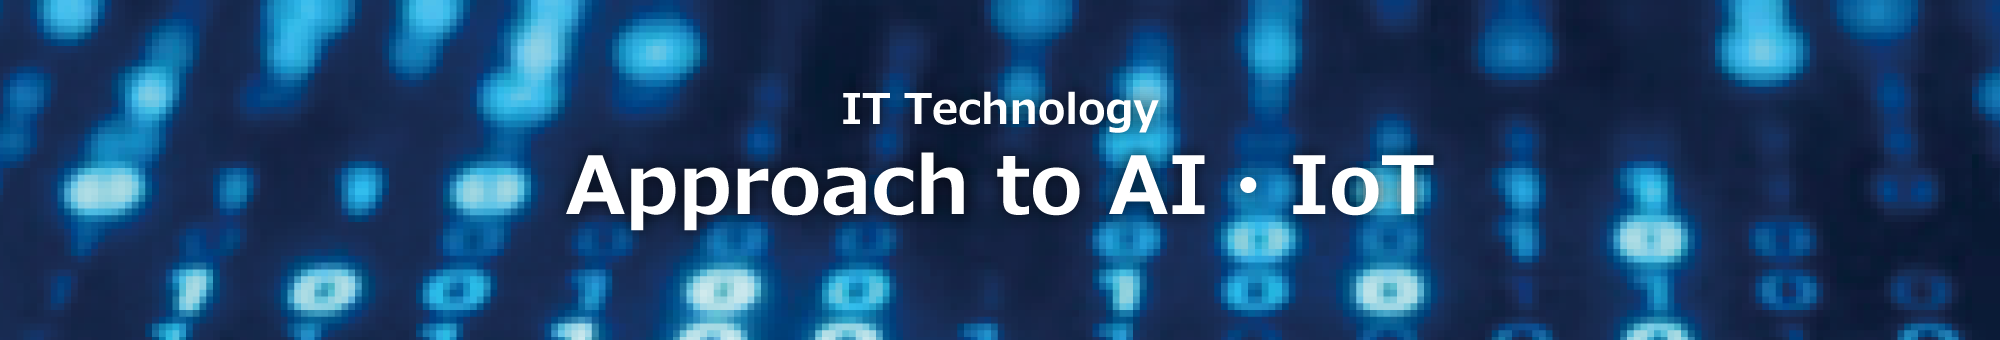 AI・IoT Initiatives for IT technology